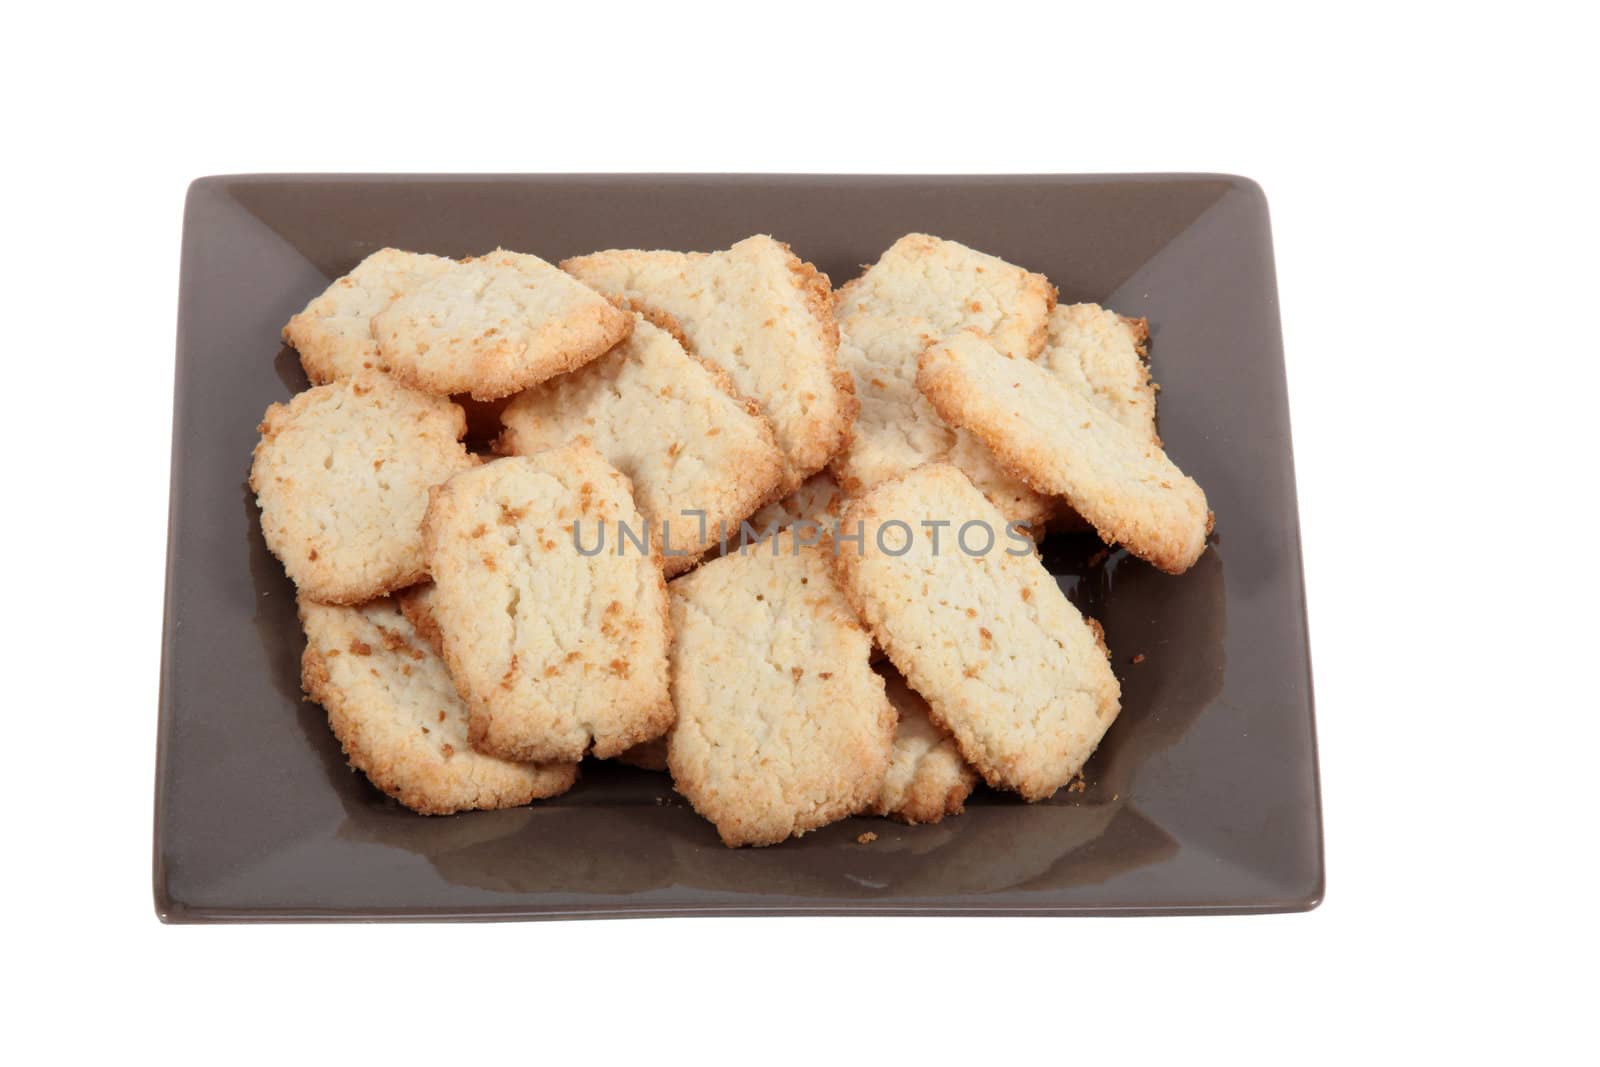 Plate of biscuits by phovoir